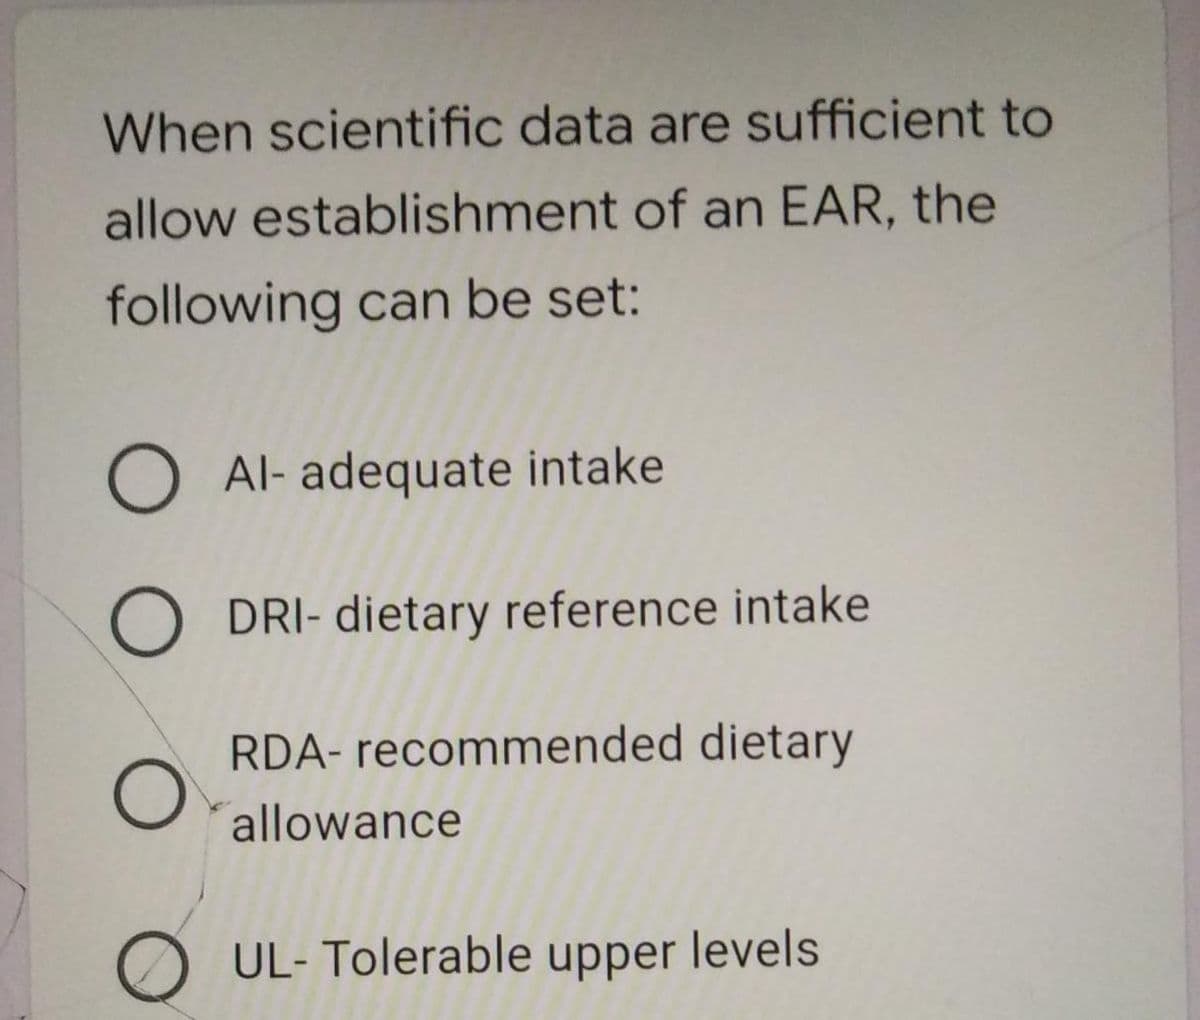 When scientific data are sufficient to
allow establishment of an EAR, the
following can be set:
O Al- adequate intake
O DRI- dietary reference intake
RDA- recommended dietary
allowance
O UL- Tolerable upper levels
